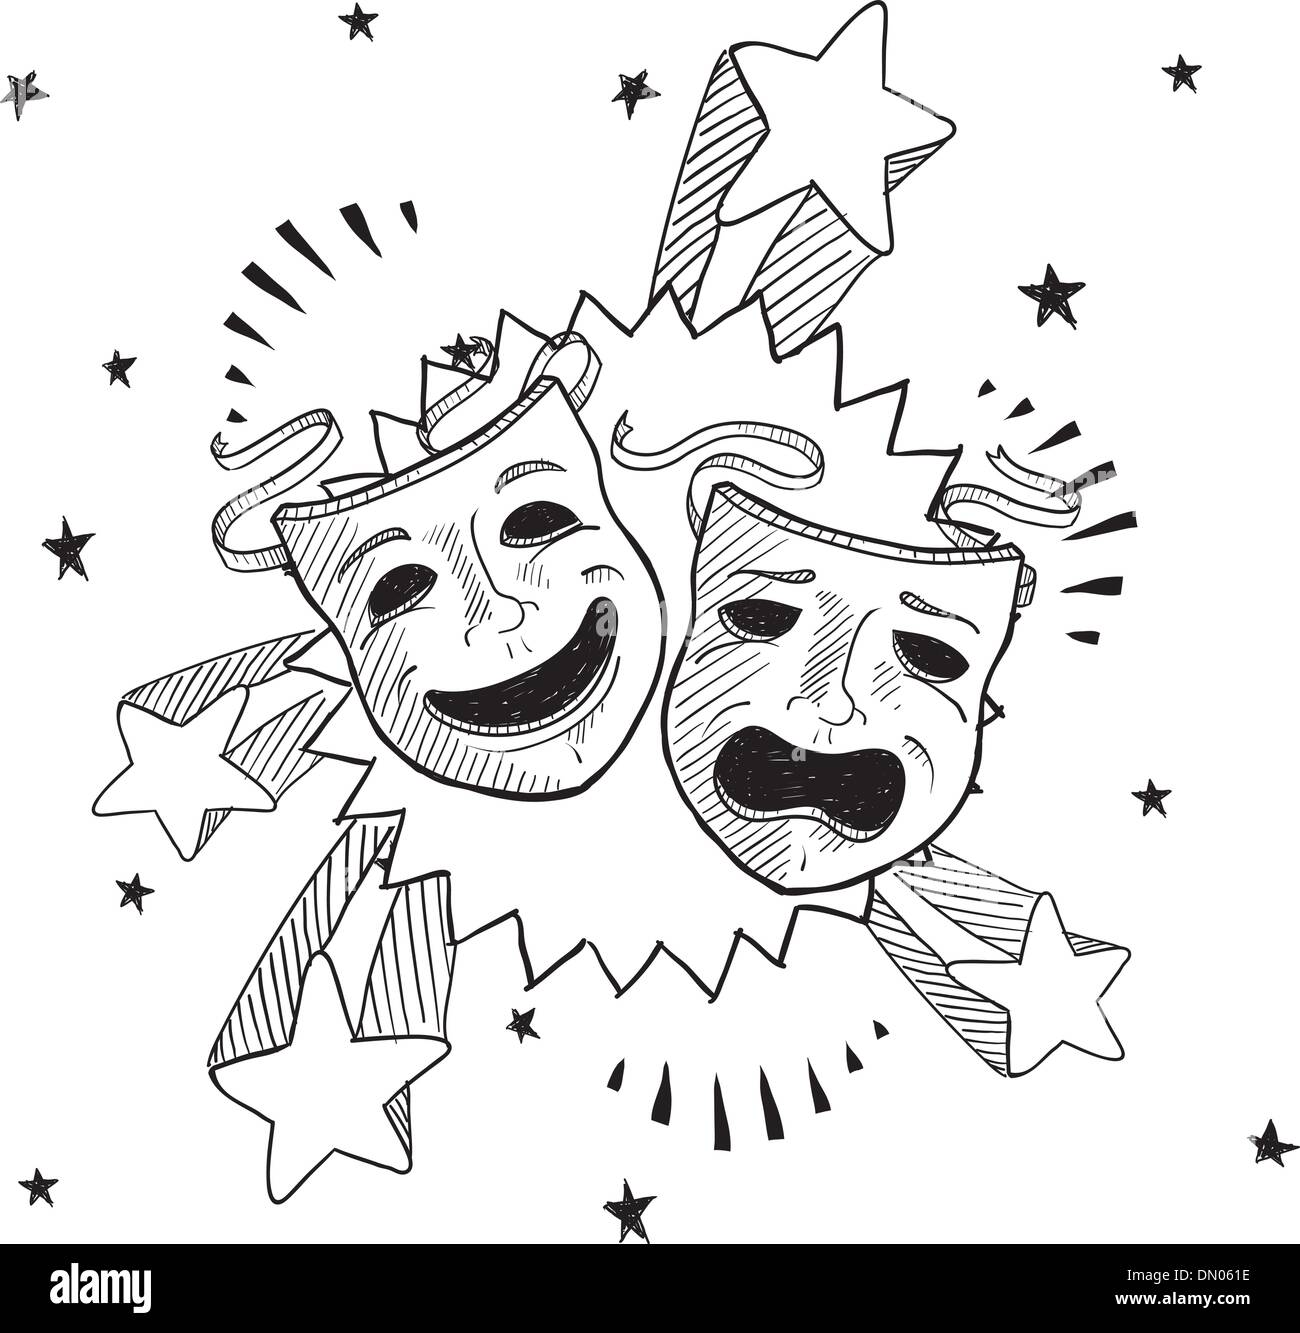 Dramatic excitement sketch Stock Vector